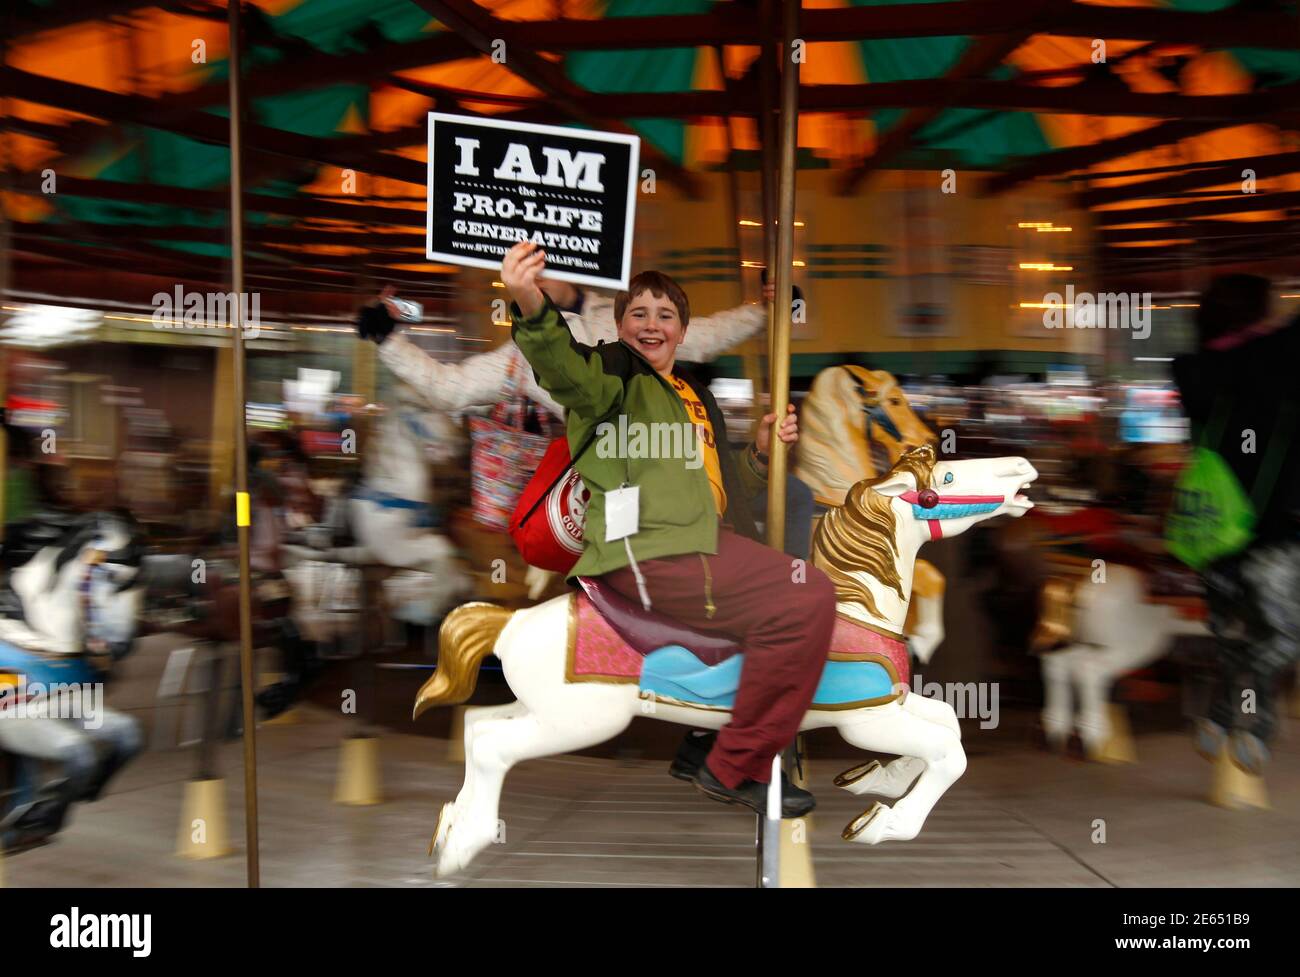 An anti-abortion demonstrator rides a carousel in the National Mall in Washington January 23, 2012. Nearly 100,000 protesters marched from the National Mall to the U.S. Supreme Court today marking the 39th anniversary of the Court's landmark Roe v. Wade decision on abortion. REUTERS/Kevin Lamarque (UNITED STATES - Tags: CIVIL UNREST ANNIVERSARY) Stock Photo